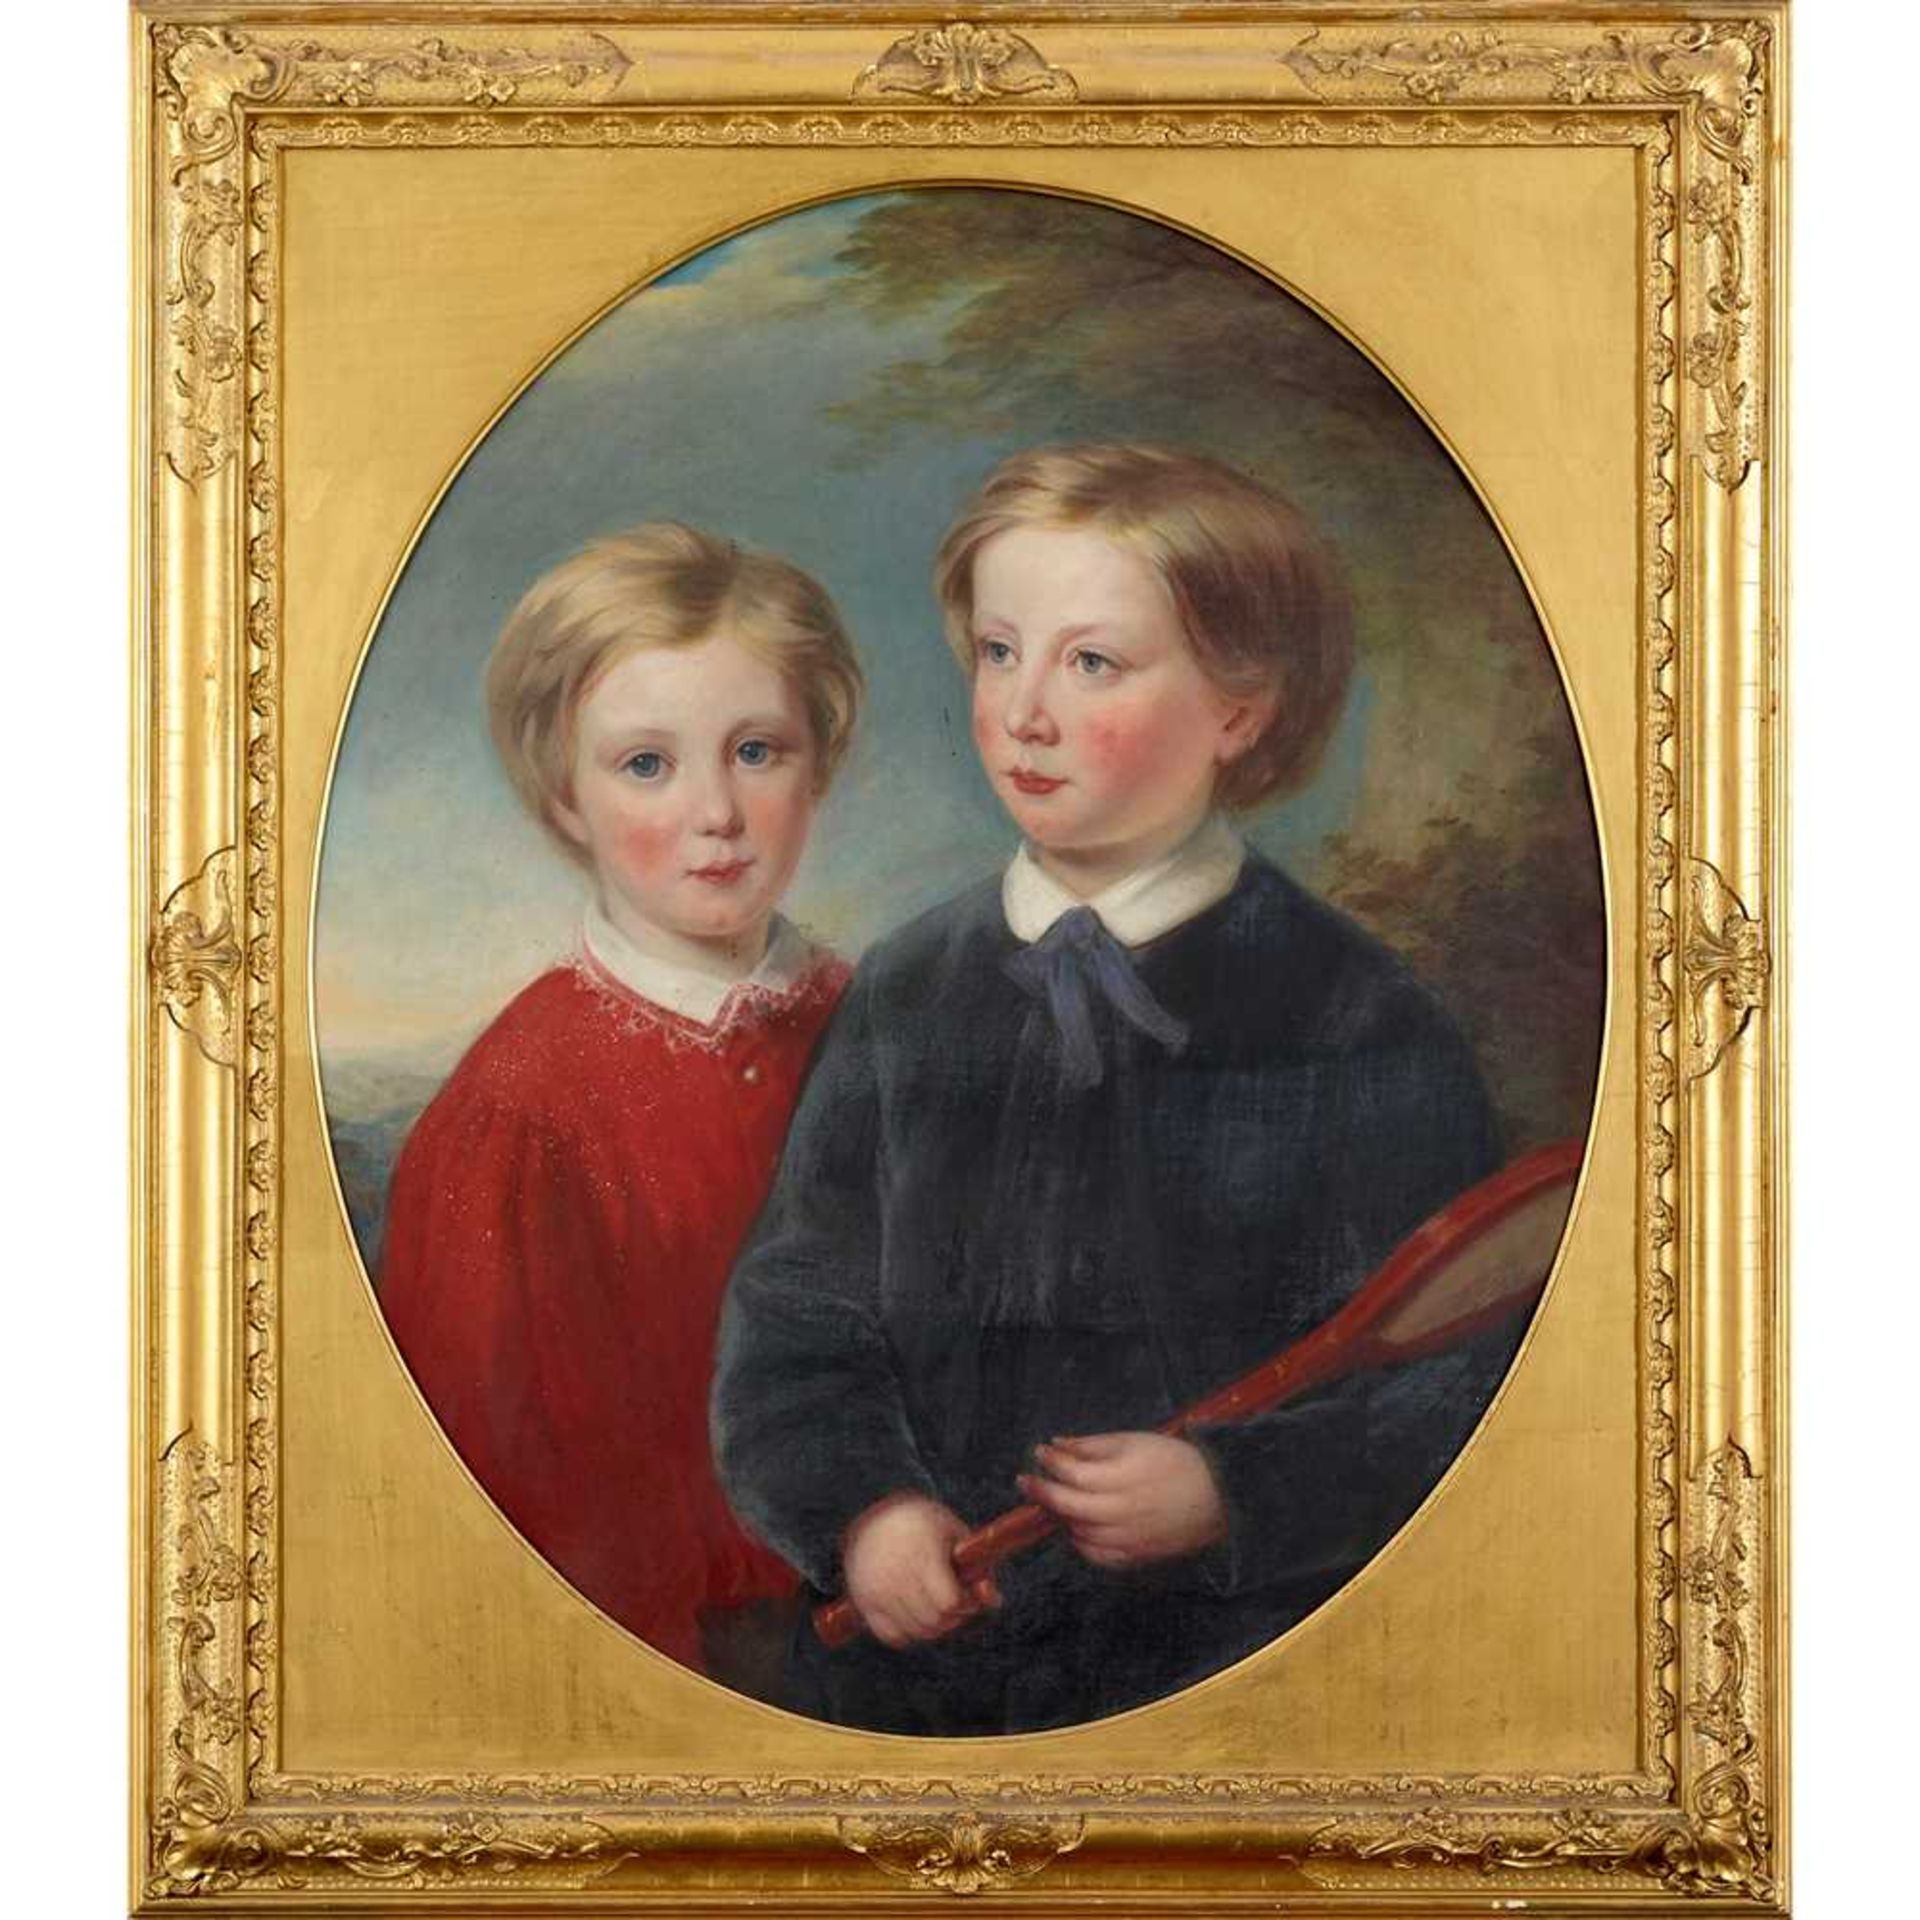 SAMUEL WEST (BRITISH 1810-1867) PORTRAIT OF TWO BOYS, ONE HOLDING A TENNIS RACQUET - Image 2 of 3